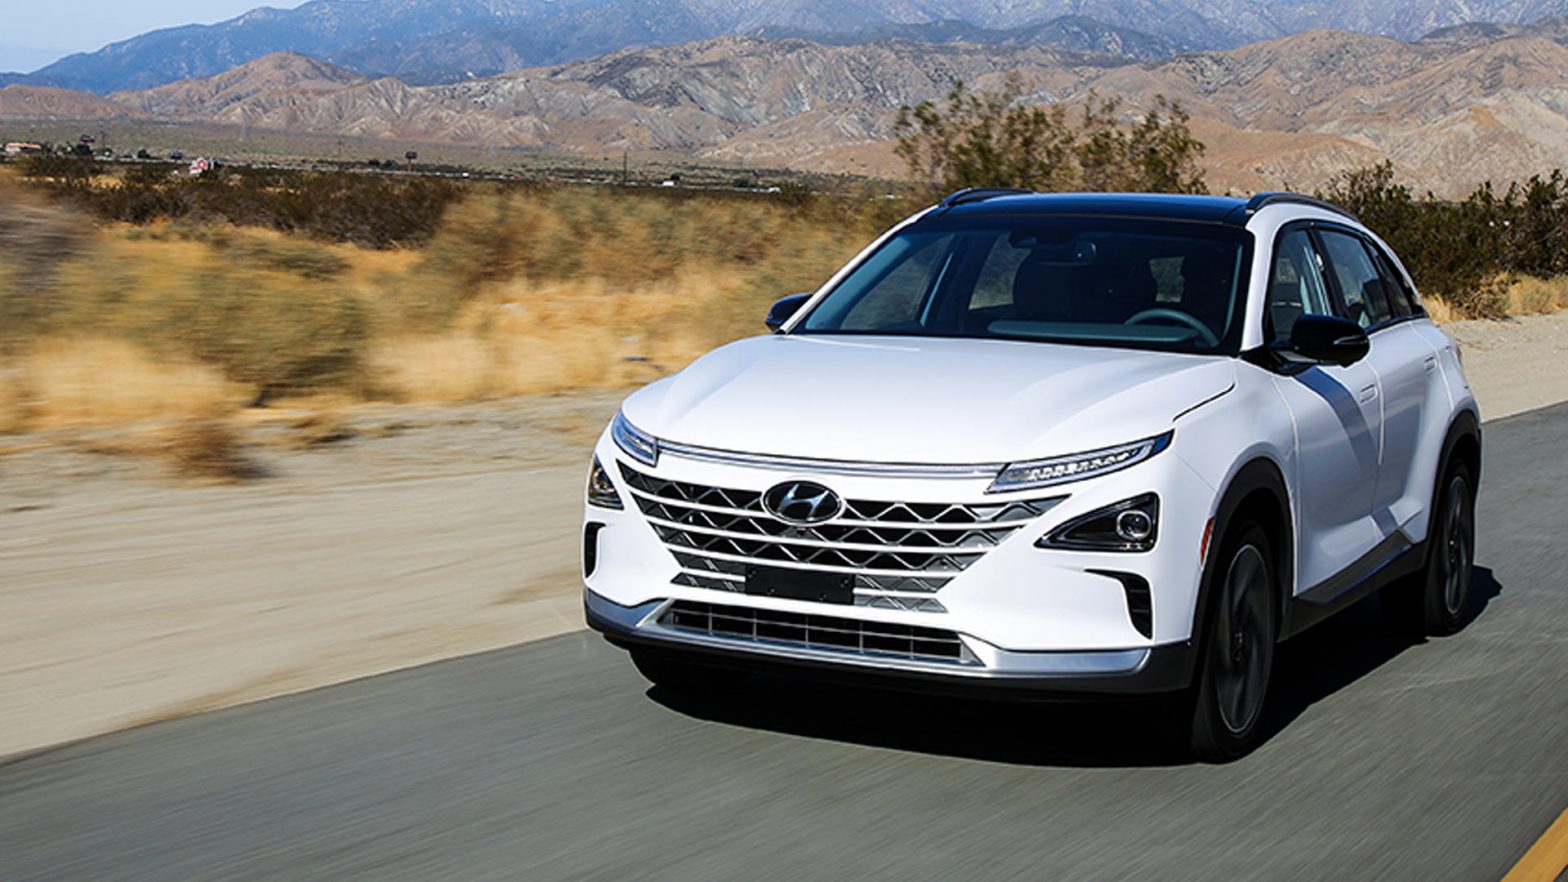 Hyundai begins feasibility study for fuel cell electric vehicle in